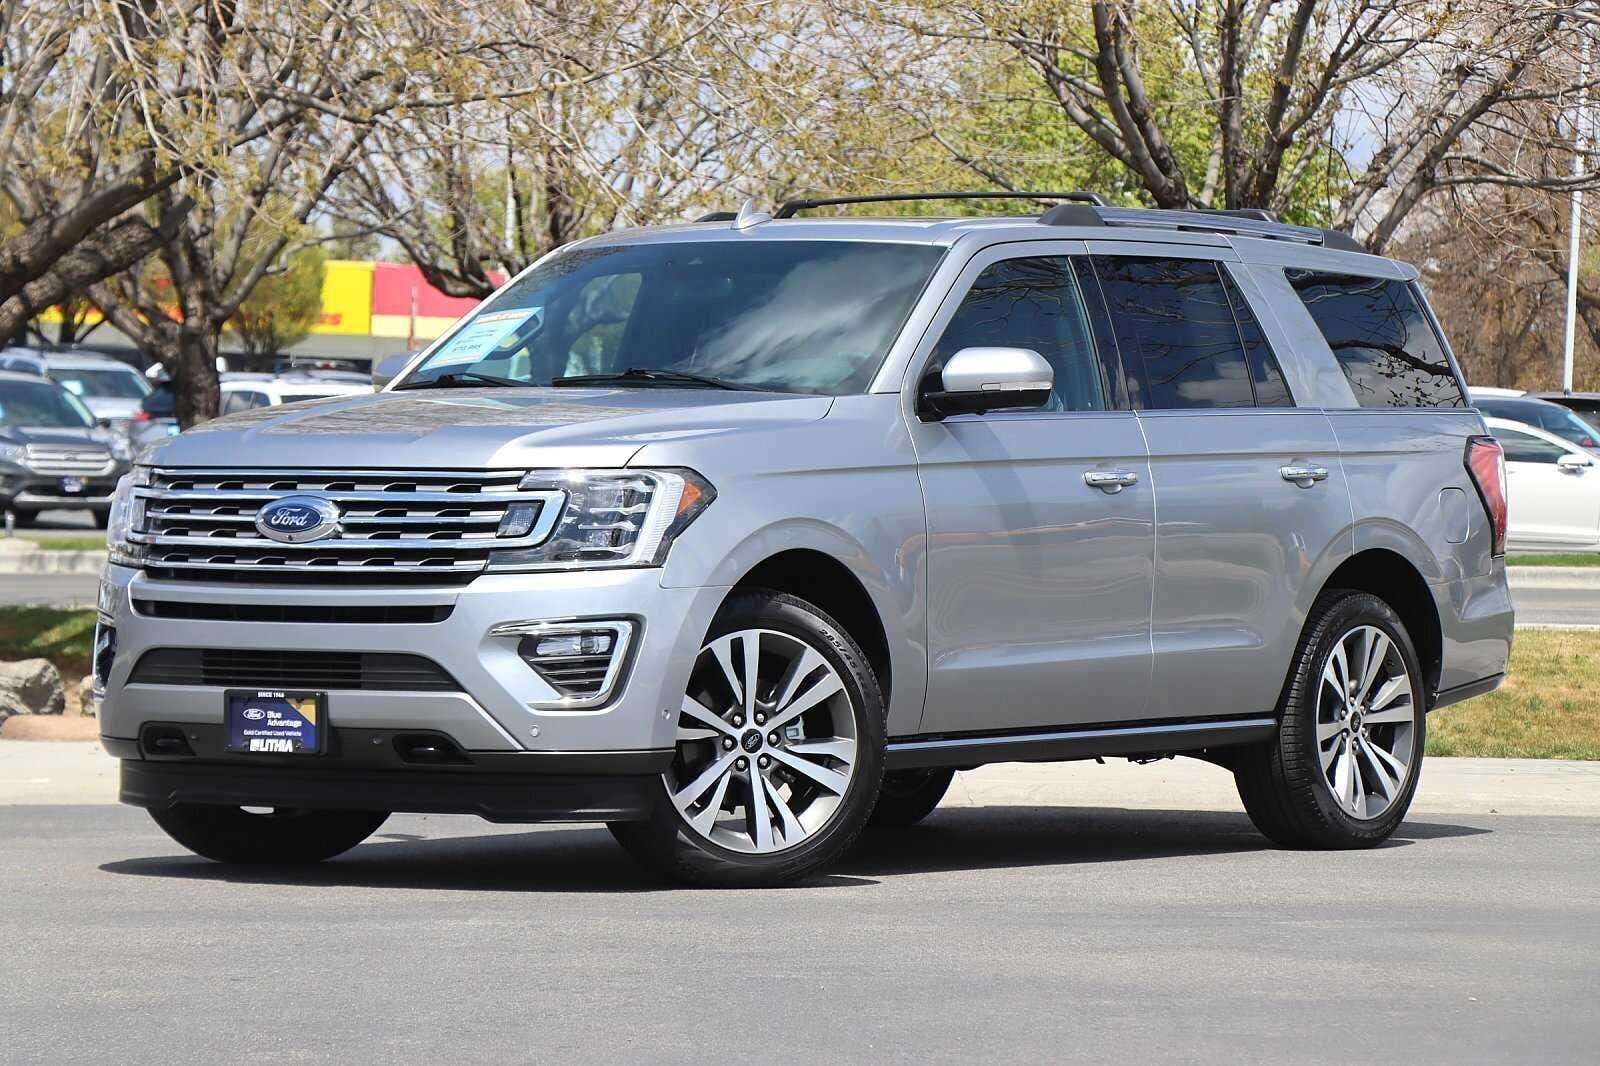 2021 Ford Expedition SUV 